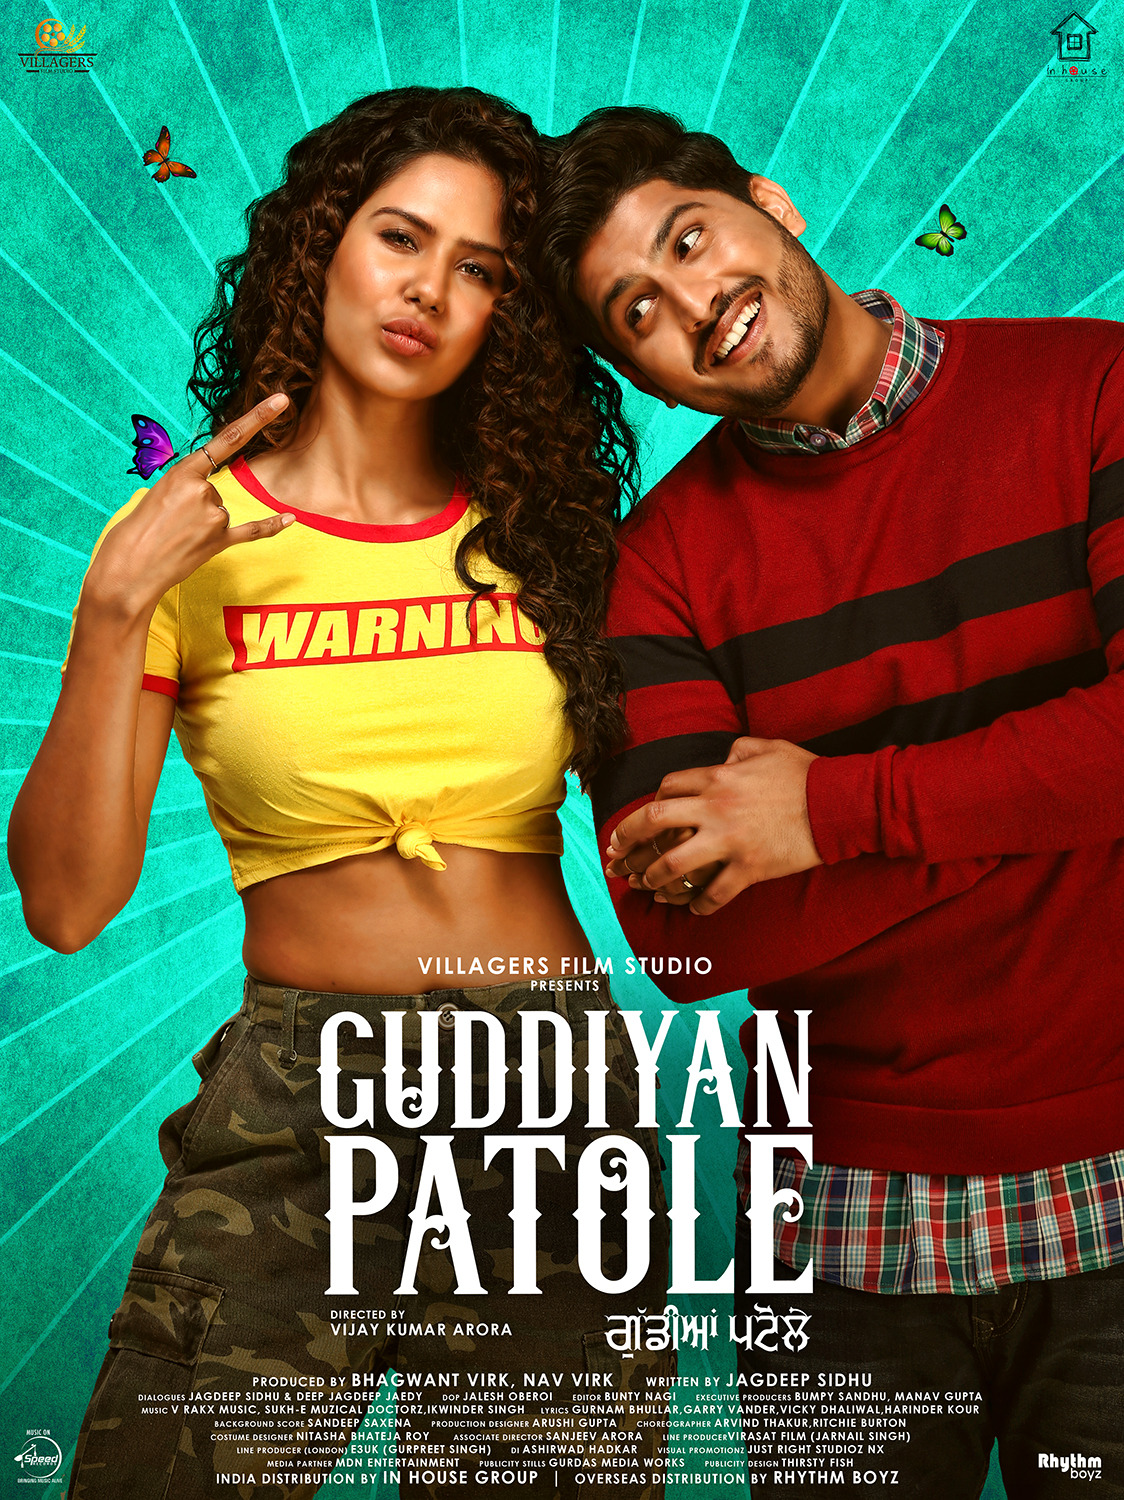 Extra Large Movie Poster Image for Guddiyan Patole (#3 of 3)